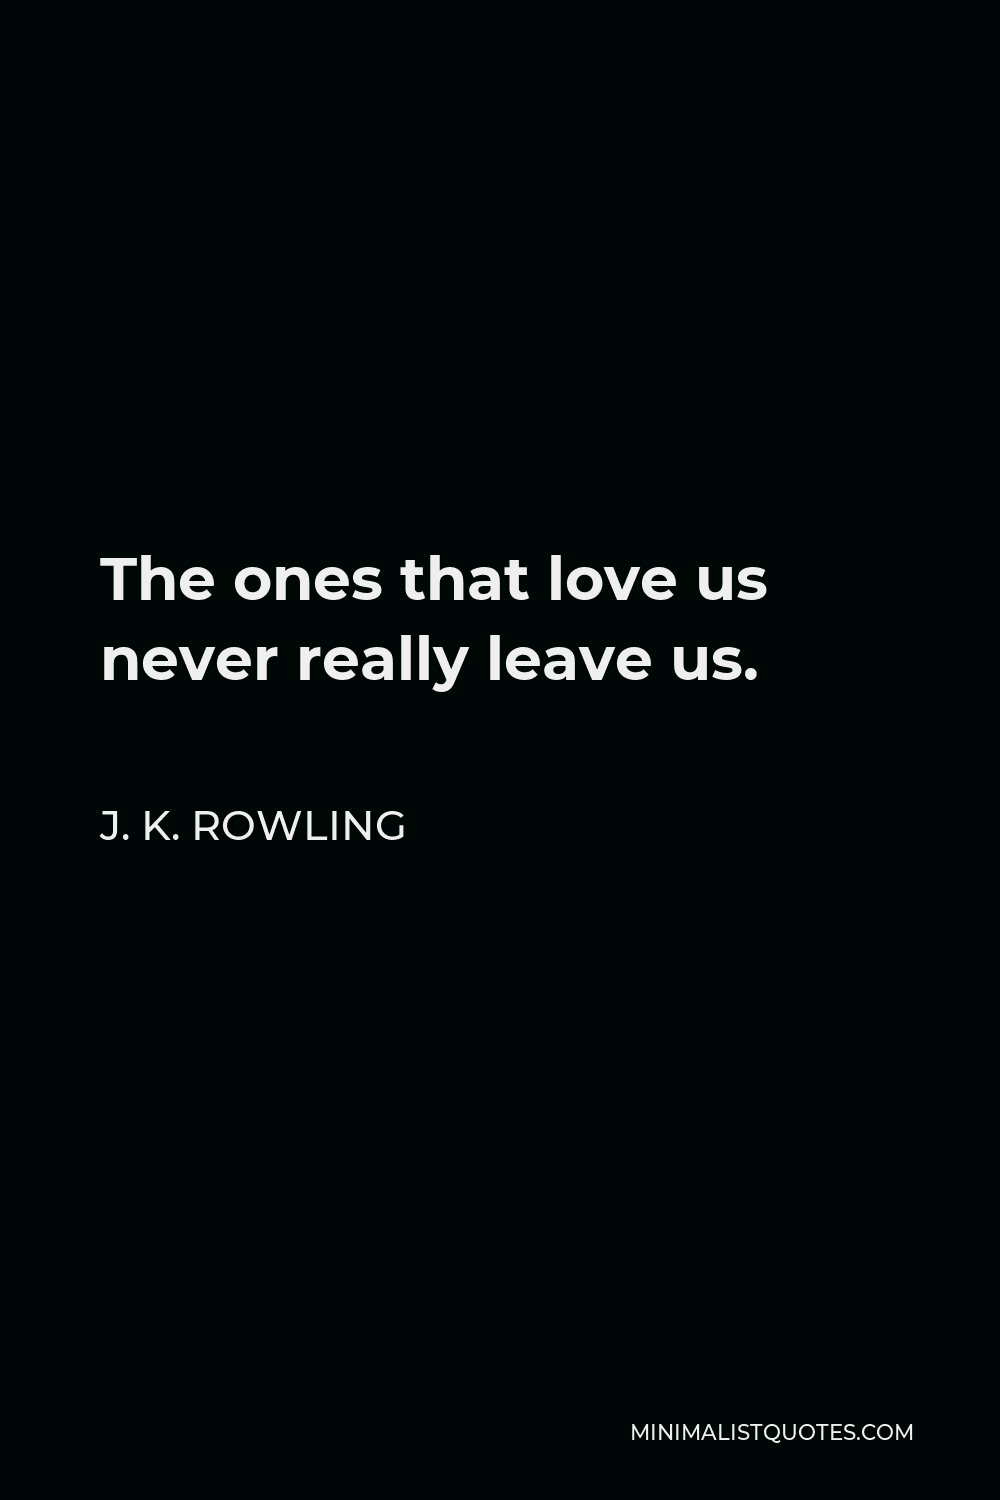 J. K. Rowling Quote - The ones that love us never really leave us.